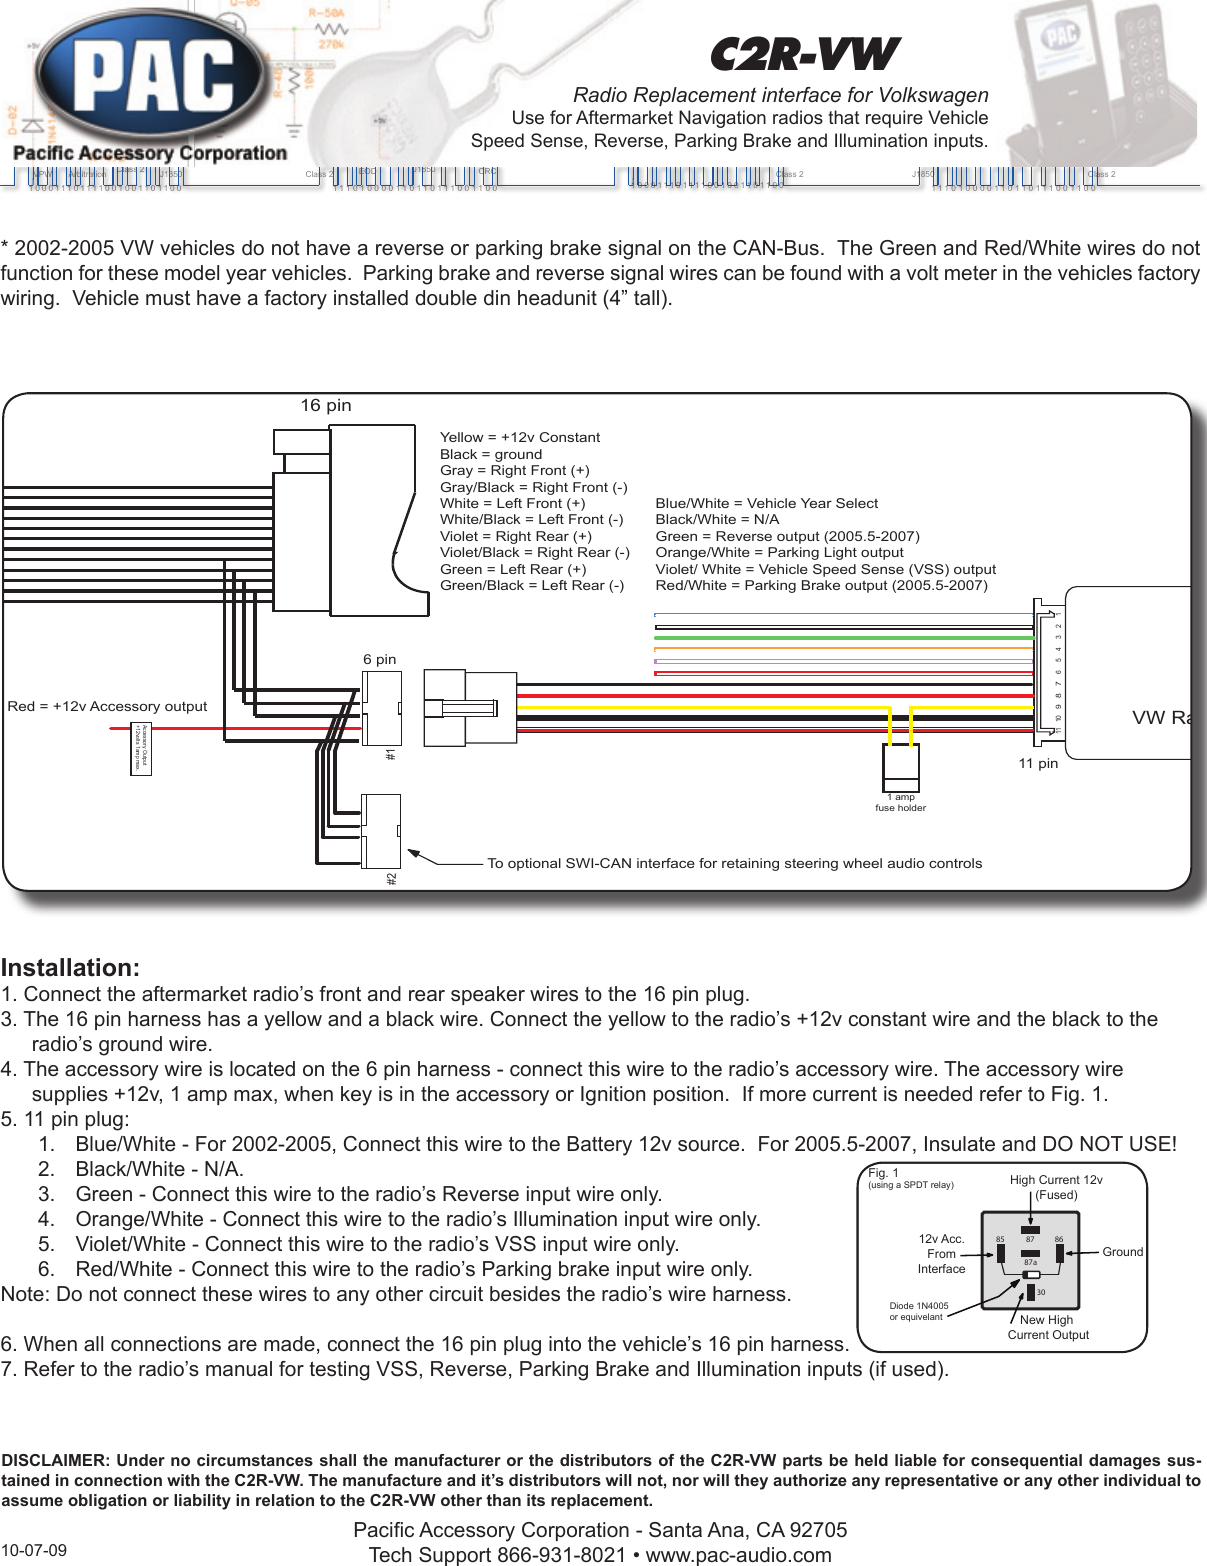 Page 1 of 1 - PAC C2R-VW User Manual  To The 8eb0ecb3-9bcd-4a5a-943a-e615b2ad5528